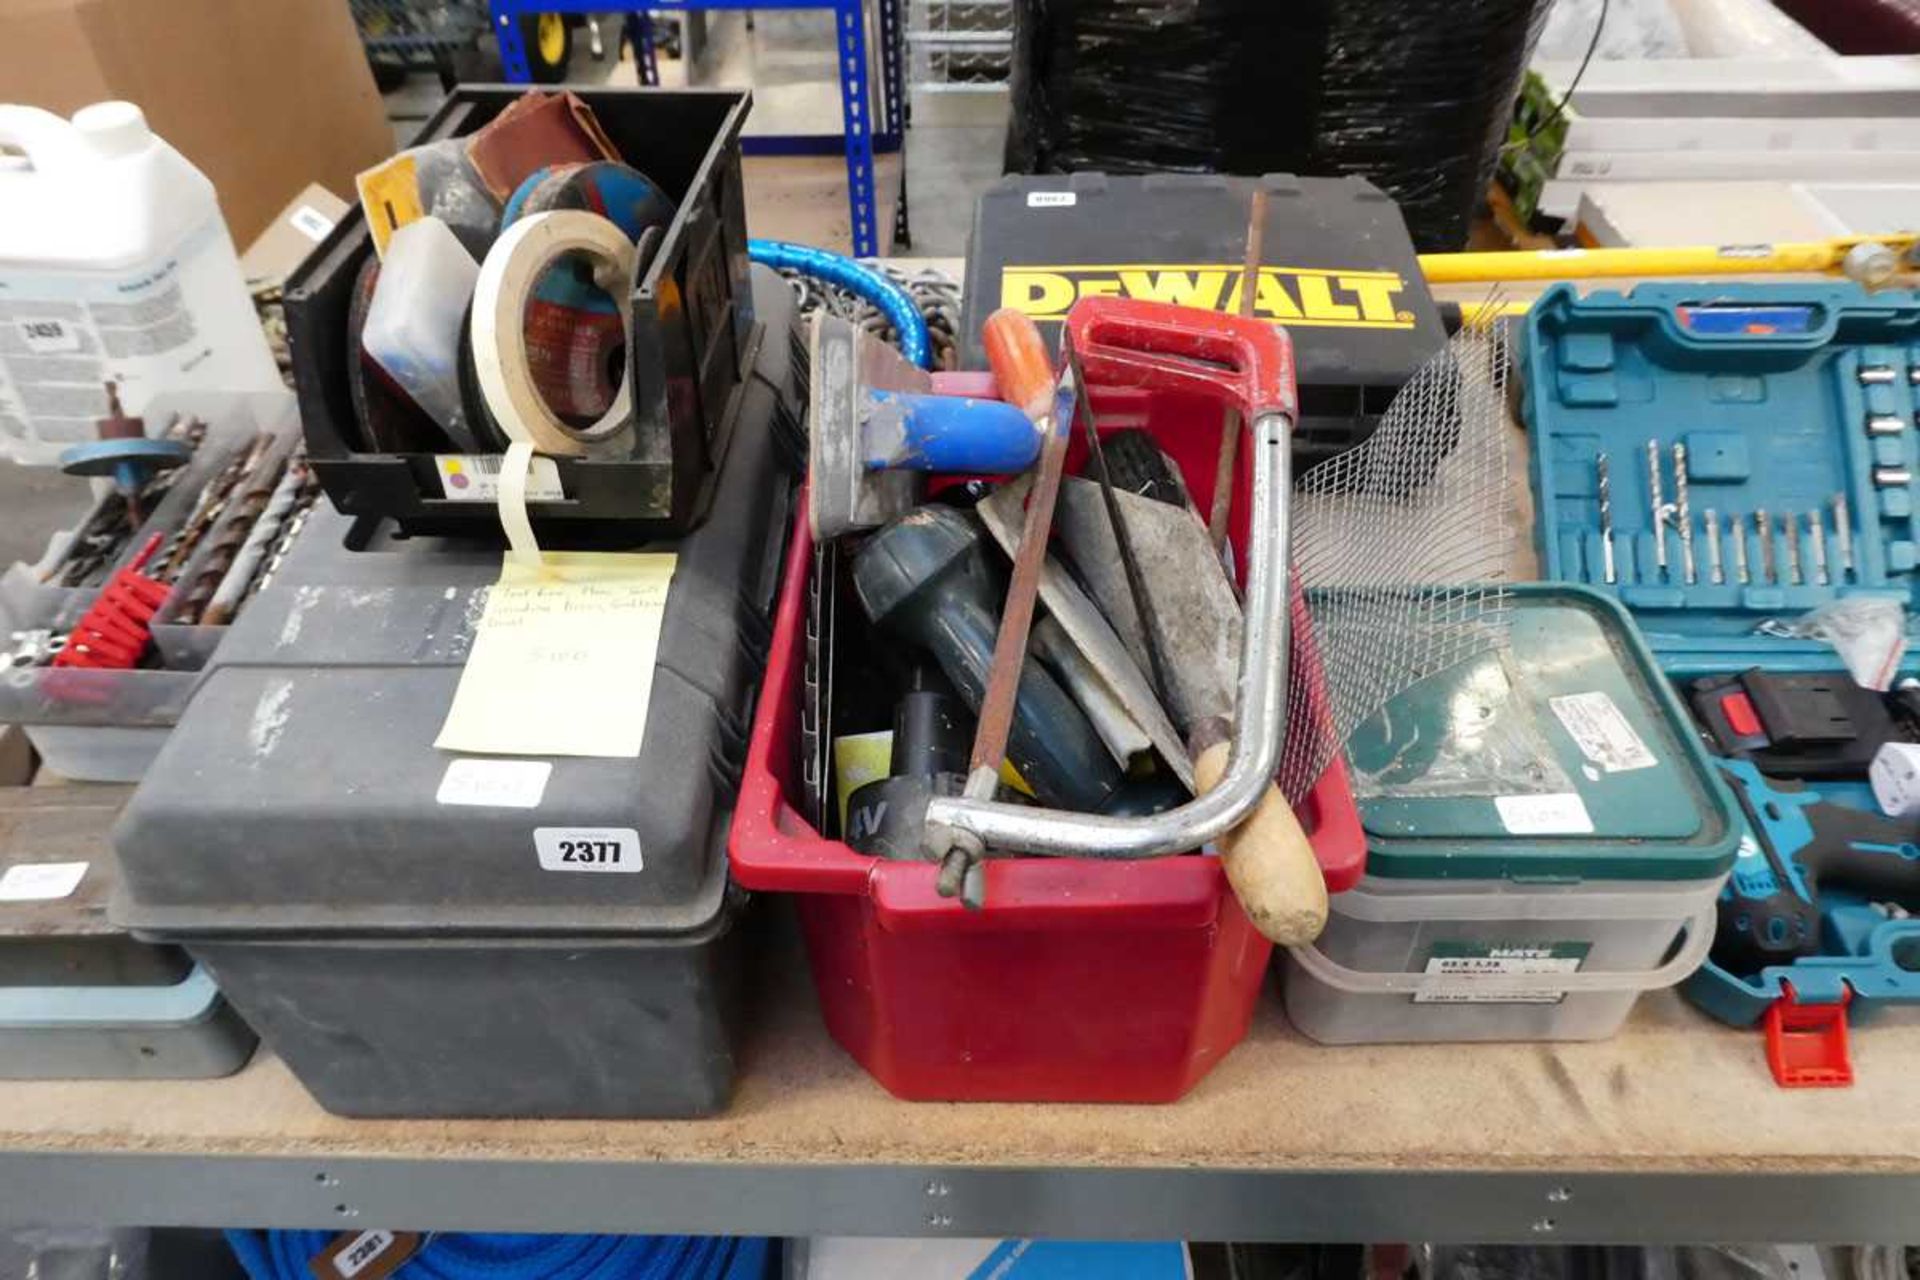 2 toolboxes containing mixed tools with linbin of various cutting discs and tub of galvanised nails